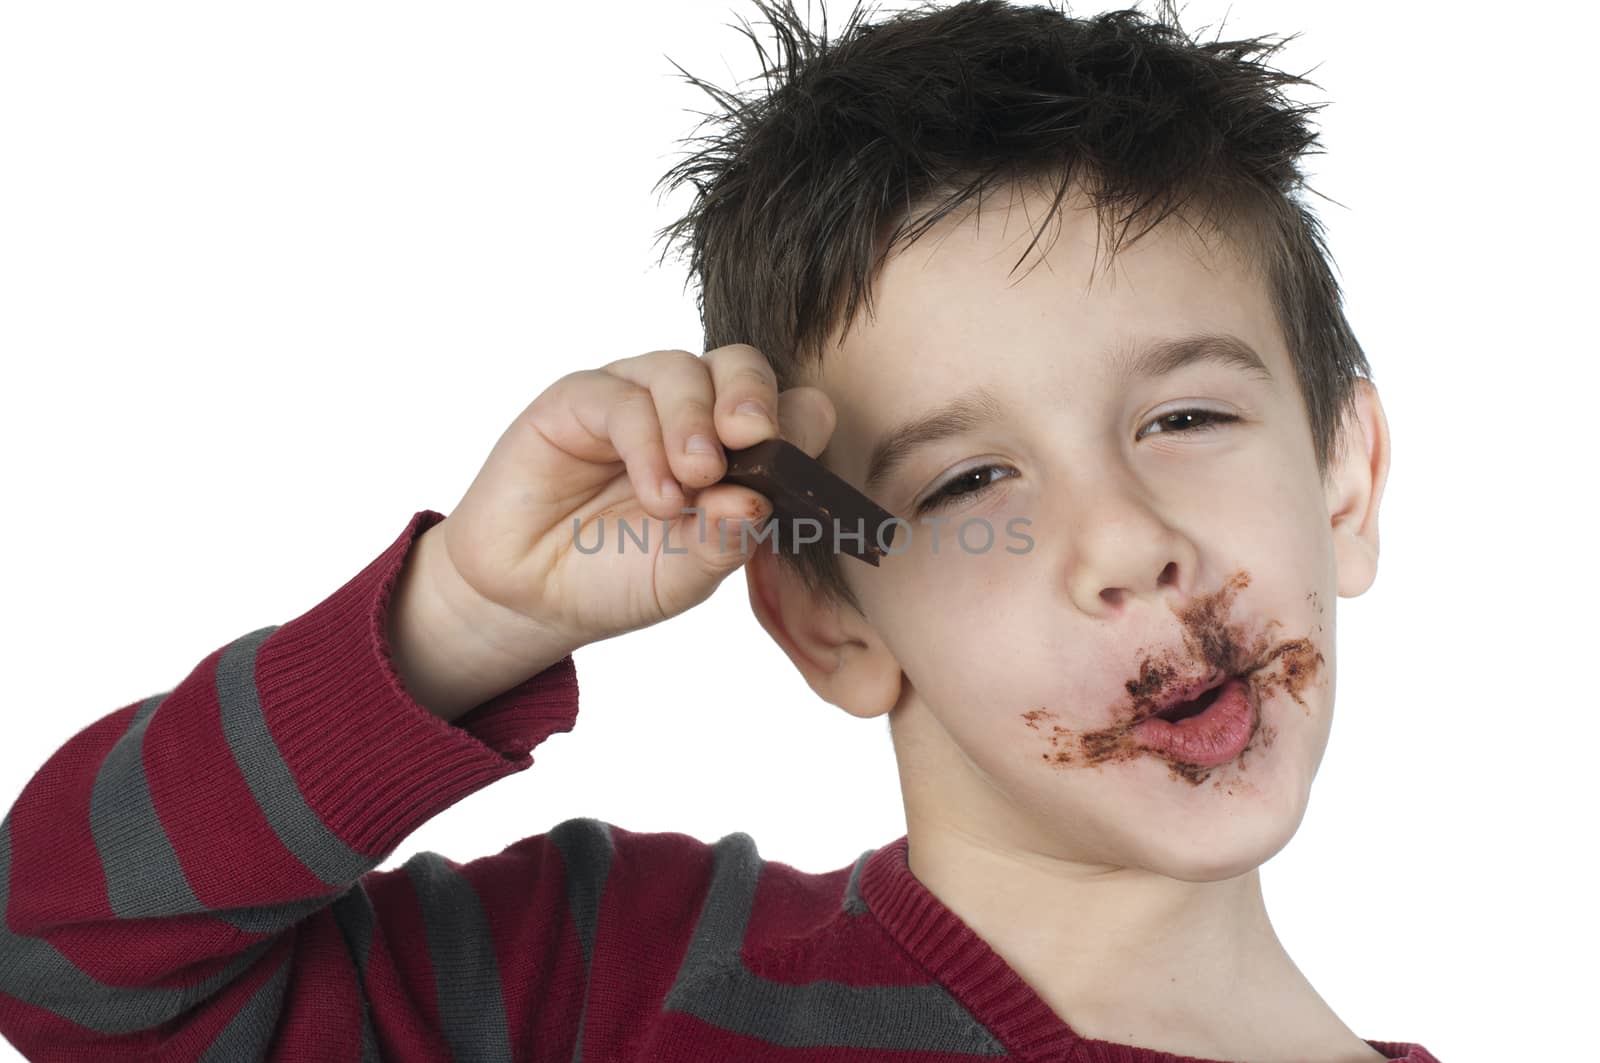 Smiling kid eating chocolate. Smeared stained with chocolate lips. White isolated